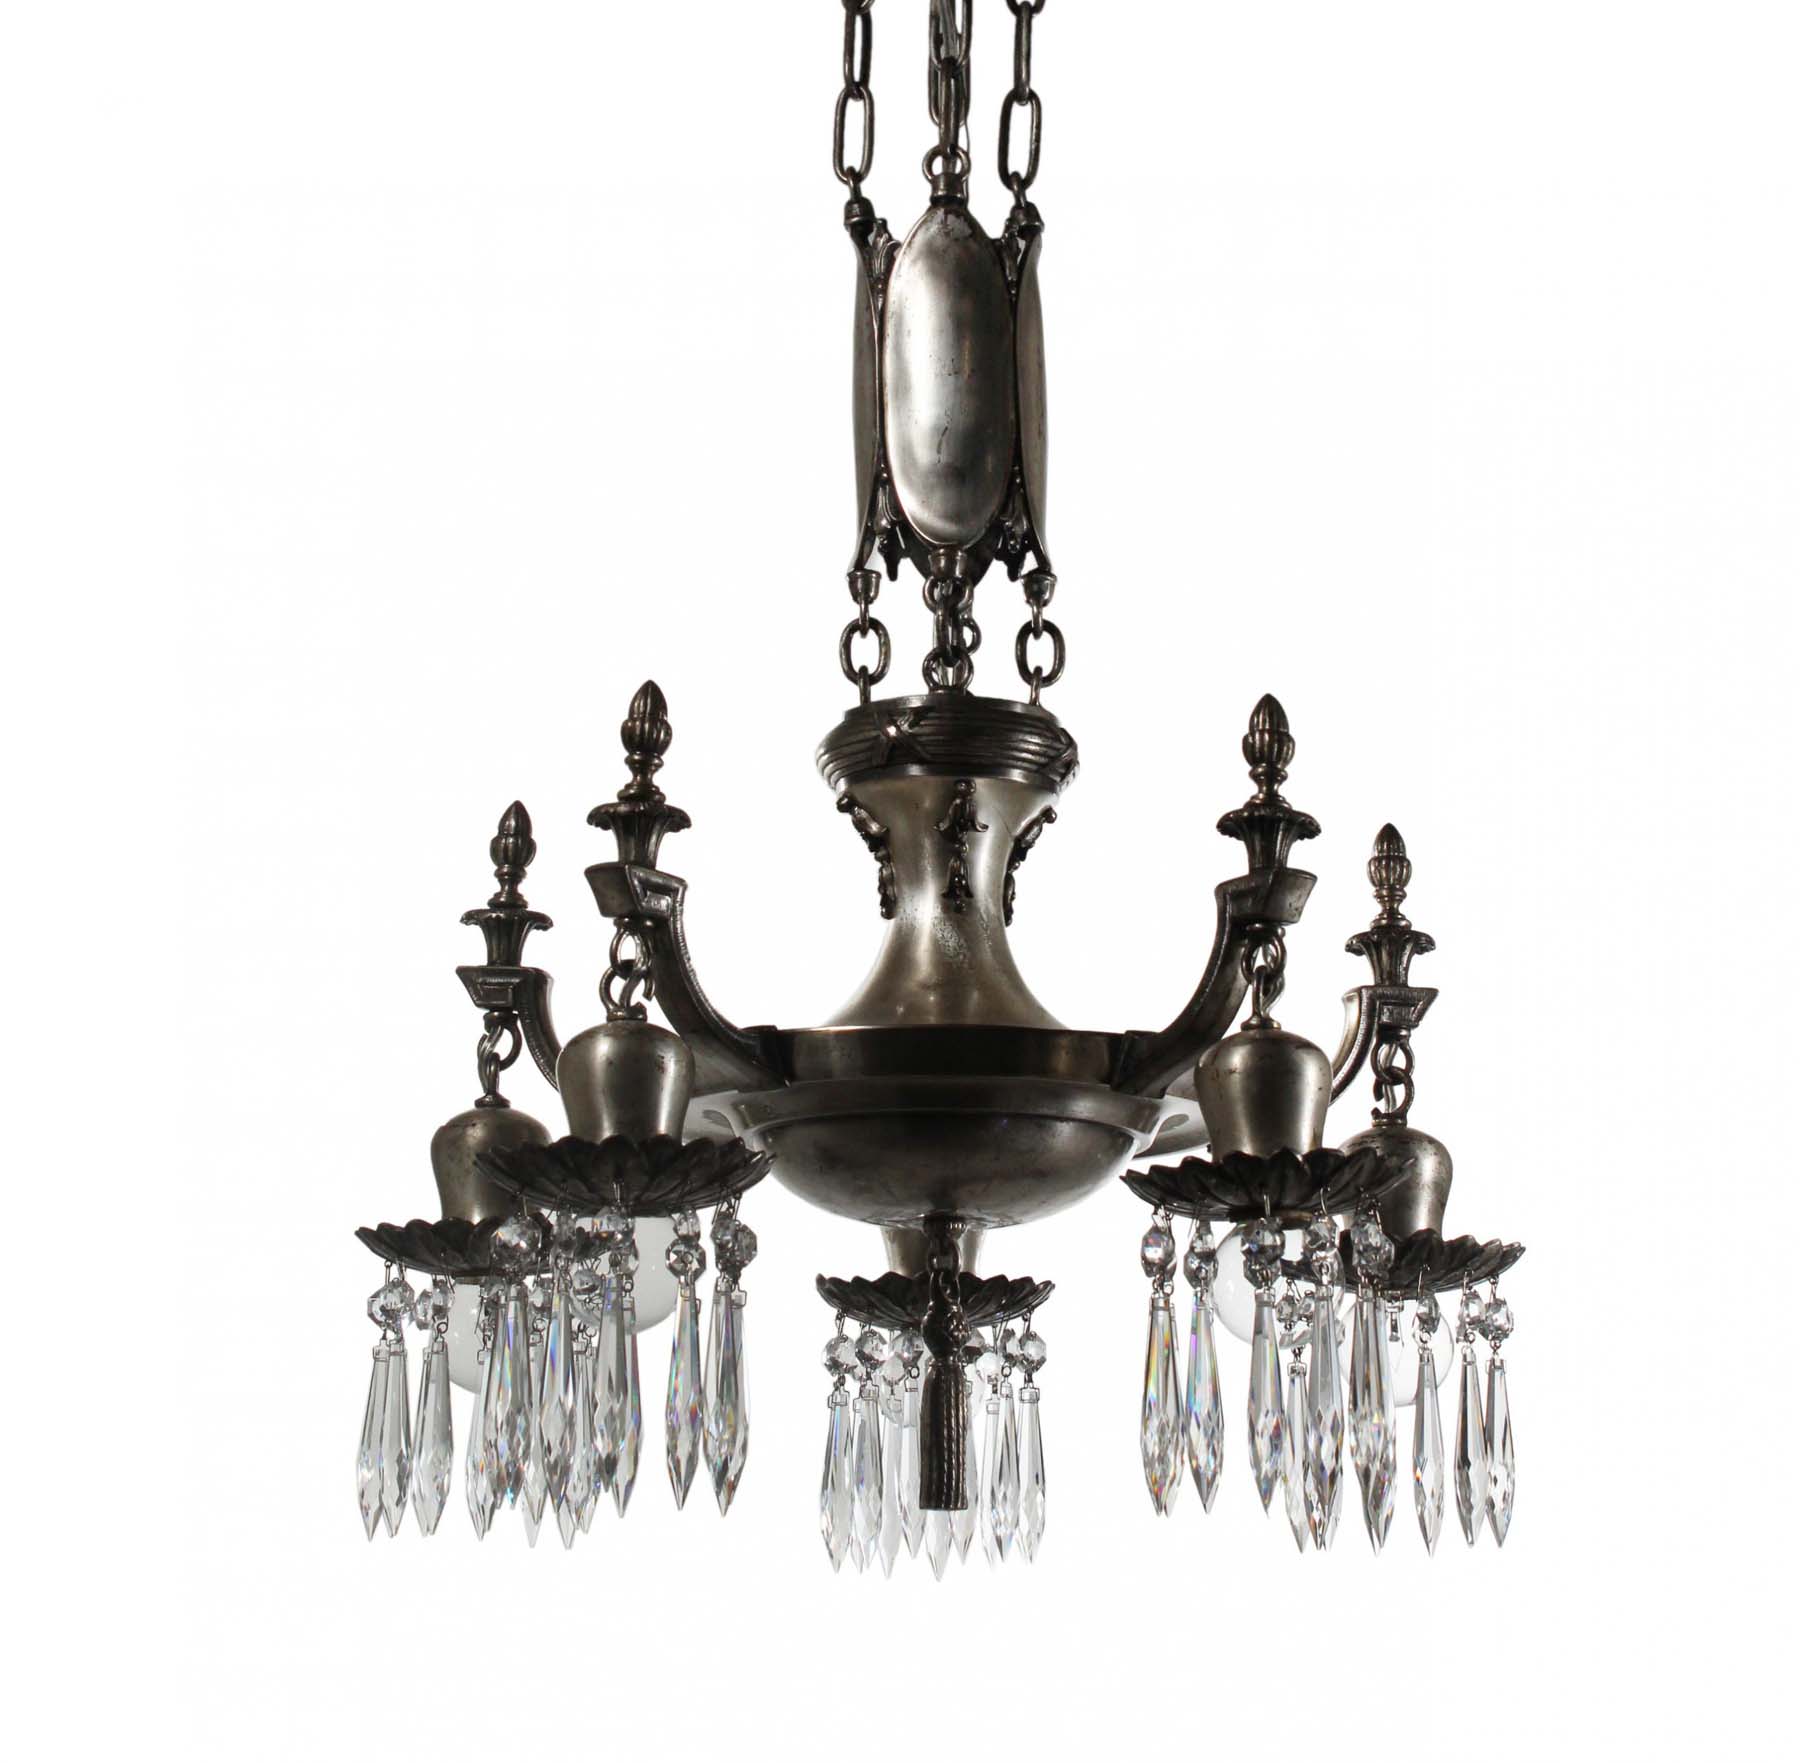 SOLD Antique Neoclassical Silver Plated Chandelier with Prisms-0